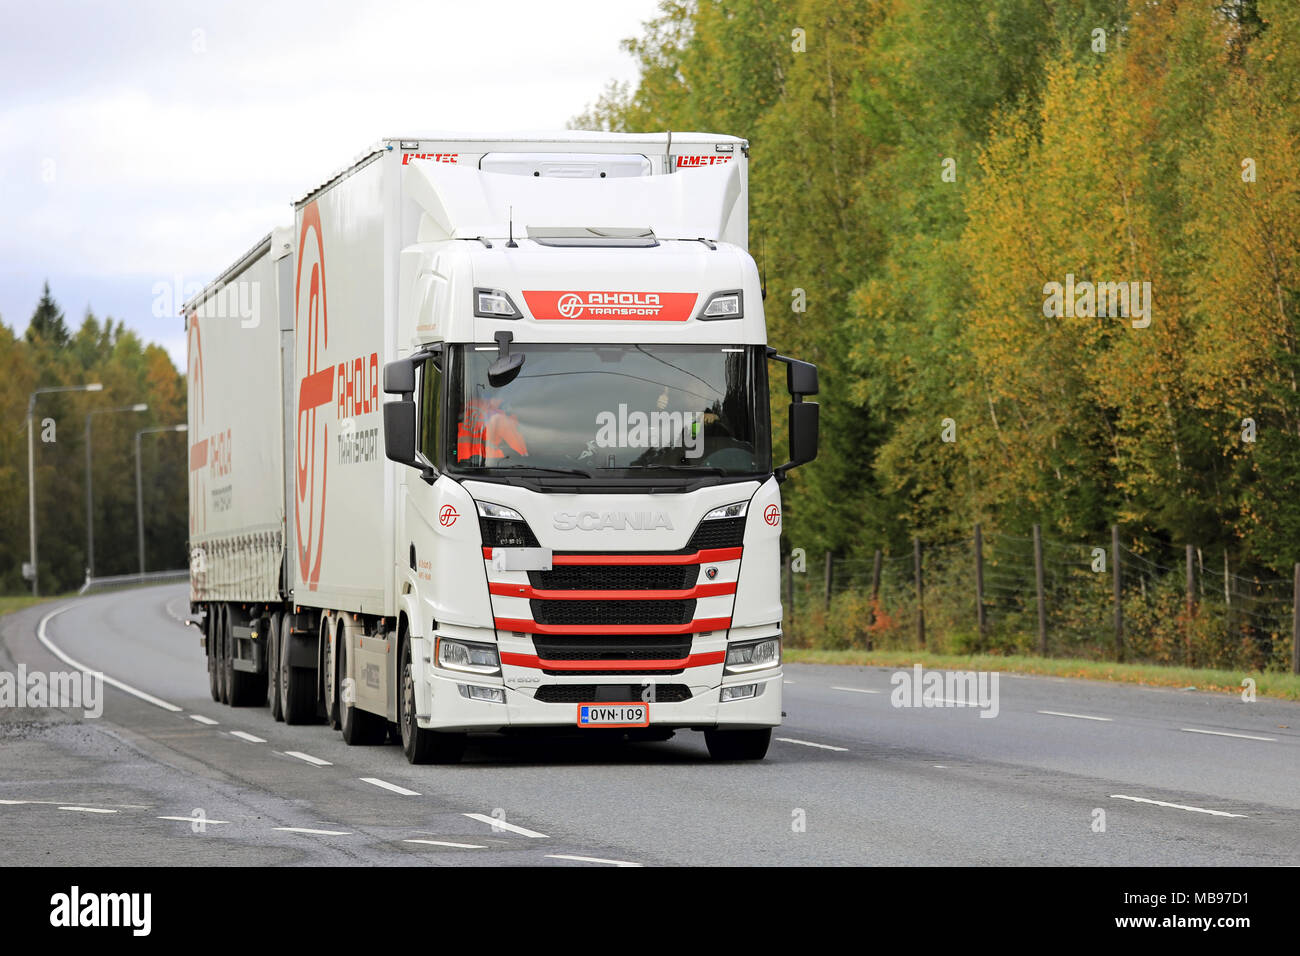 KANGASALA, FINLAND - SEPTEMBER 21, 2017: Scania R500 cargo truck of Ahola Transport delivers goods along highway in autumn. Stock Photo